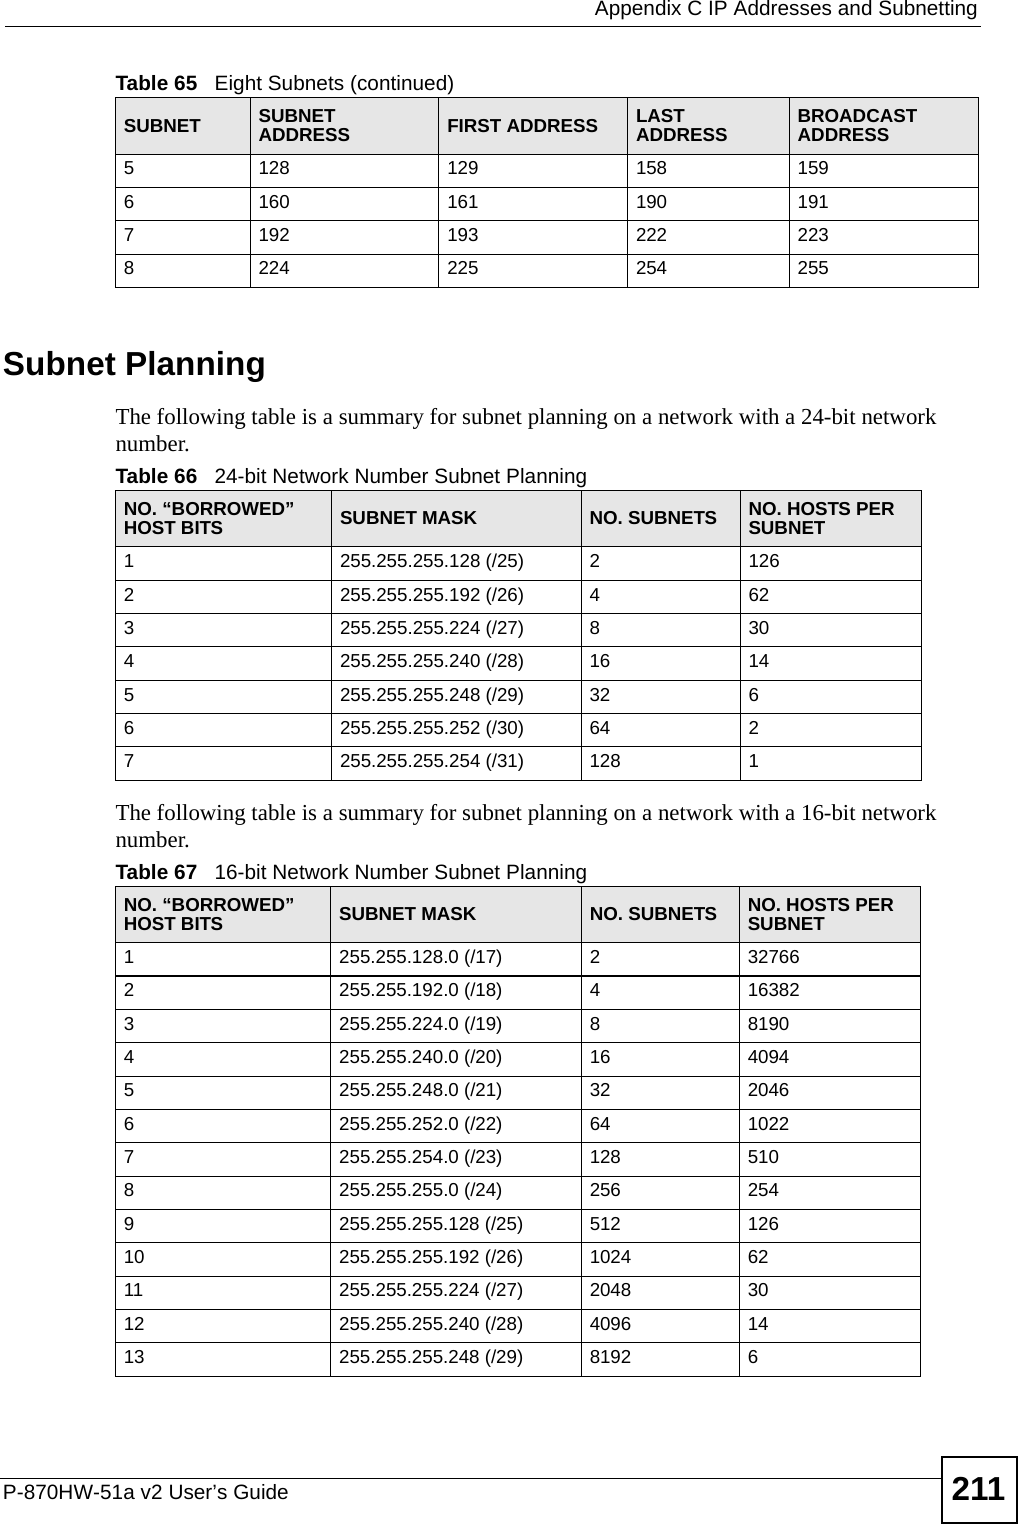  Appendix C IP Addresses and SubnettingP-870HW-51a v2 User’s Guide 211Subnet PlanningThe following table is a summary for subnet planning on a network with a 24-bit network number.The following table is a summary for subnet planning on a network with a 16-bit network number. 5128 129 158 1596160 161 190 1917192 193 222 2238224 225 254 255Table 65   Eight Subnets (continued)SUBNET SUBNET ADDRESS FIRST ADDRESS LAST ADDRESS BROADCAST ADDRESSTable 66   24-bit Network Number Subnet PlanningNO. “BORROWED” HOST BITS SUBNET MASK NO. SUBNETS NO. HOSTS PER SUBNET1255.255.255.128 (/25) 21262255.255.255.192 (/26) 4623255.255.255.224 (/27) 8304255.255.255.240 (/28) 16 145255.255.255.248 (/29) 32 66255.255.255.252 (/30) 64 27255.255.255.254 (/31) 128 1Table 67   16-bit Network Number Subnet PlanningNO. “BORROWED” HOST BITS SUBNET MASK NO. SUBNETS NO. HOSTS PER SUBNET1255.255.128.0 (/17) 2327662255.255.192.0 (/18) 4163823255.255.224.0 (/19) 881904255.255.240.0 (/20) 16 40945255.255.248.0 (/21) 32 20466255.255.252.0 (/22) 64 10227255.255.254.0 (/23) 128 5108255.255.255.0 (/24) 256 2549255.255.255.128 (/25) 512 12610 255.255.255.192 (/26) 1024 6211 255.255.255.224 (/27) 2048 3012 255.255.255.240 (/28) 4096 1413 255.255.255.248 (/29) 8192 6